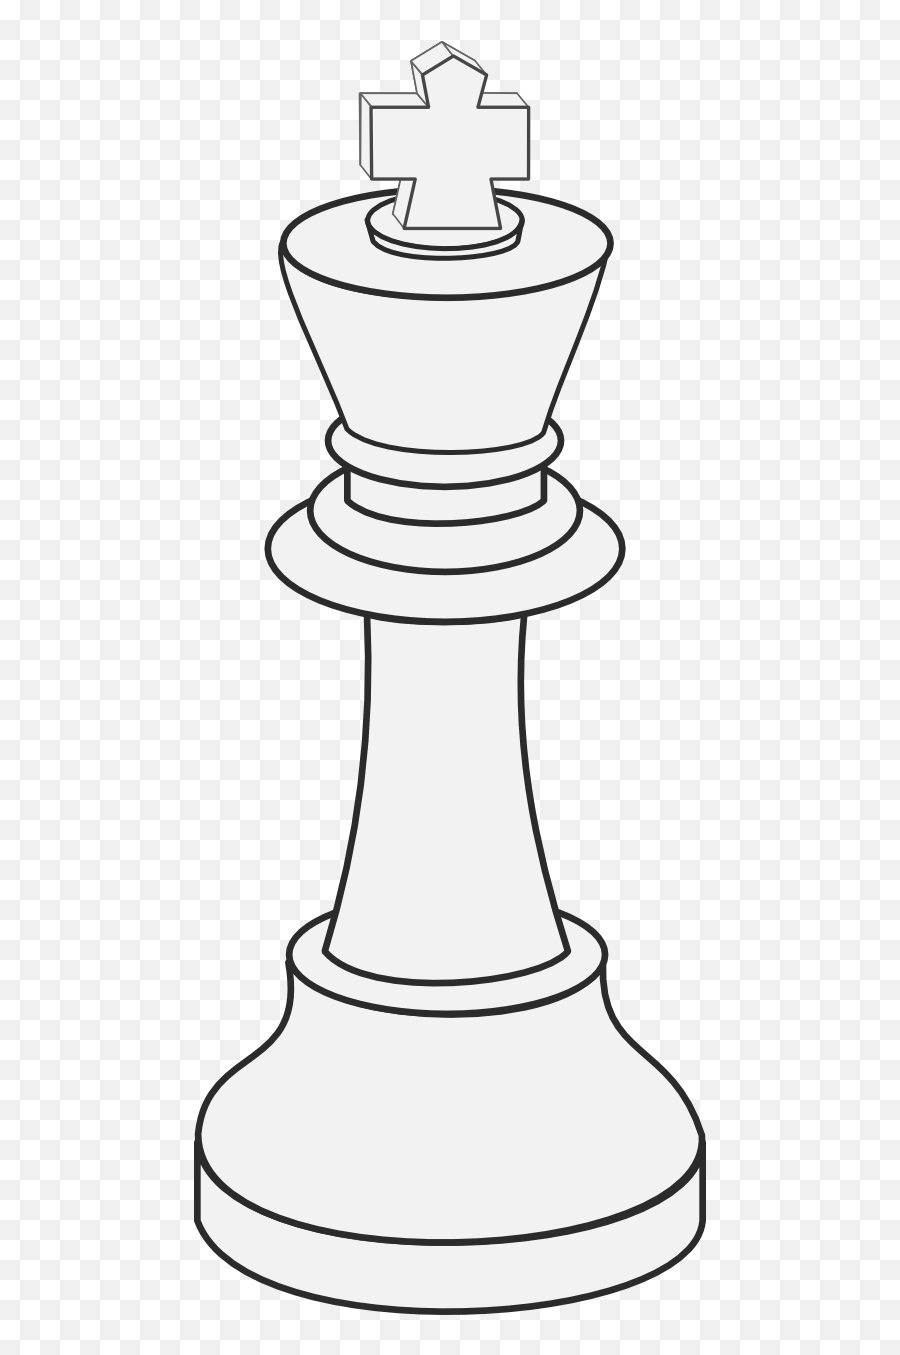 White King Chess Clipart I2clipart - Royalty Free Public Emoji,Games Clipart Black And White